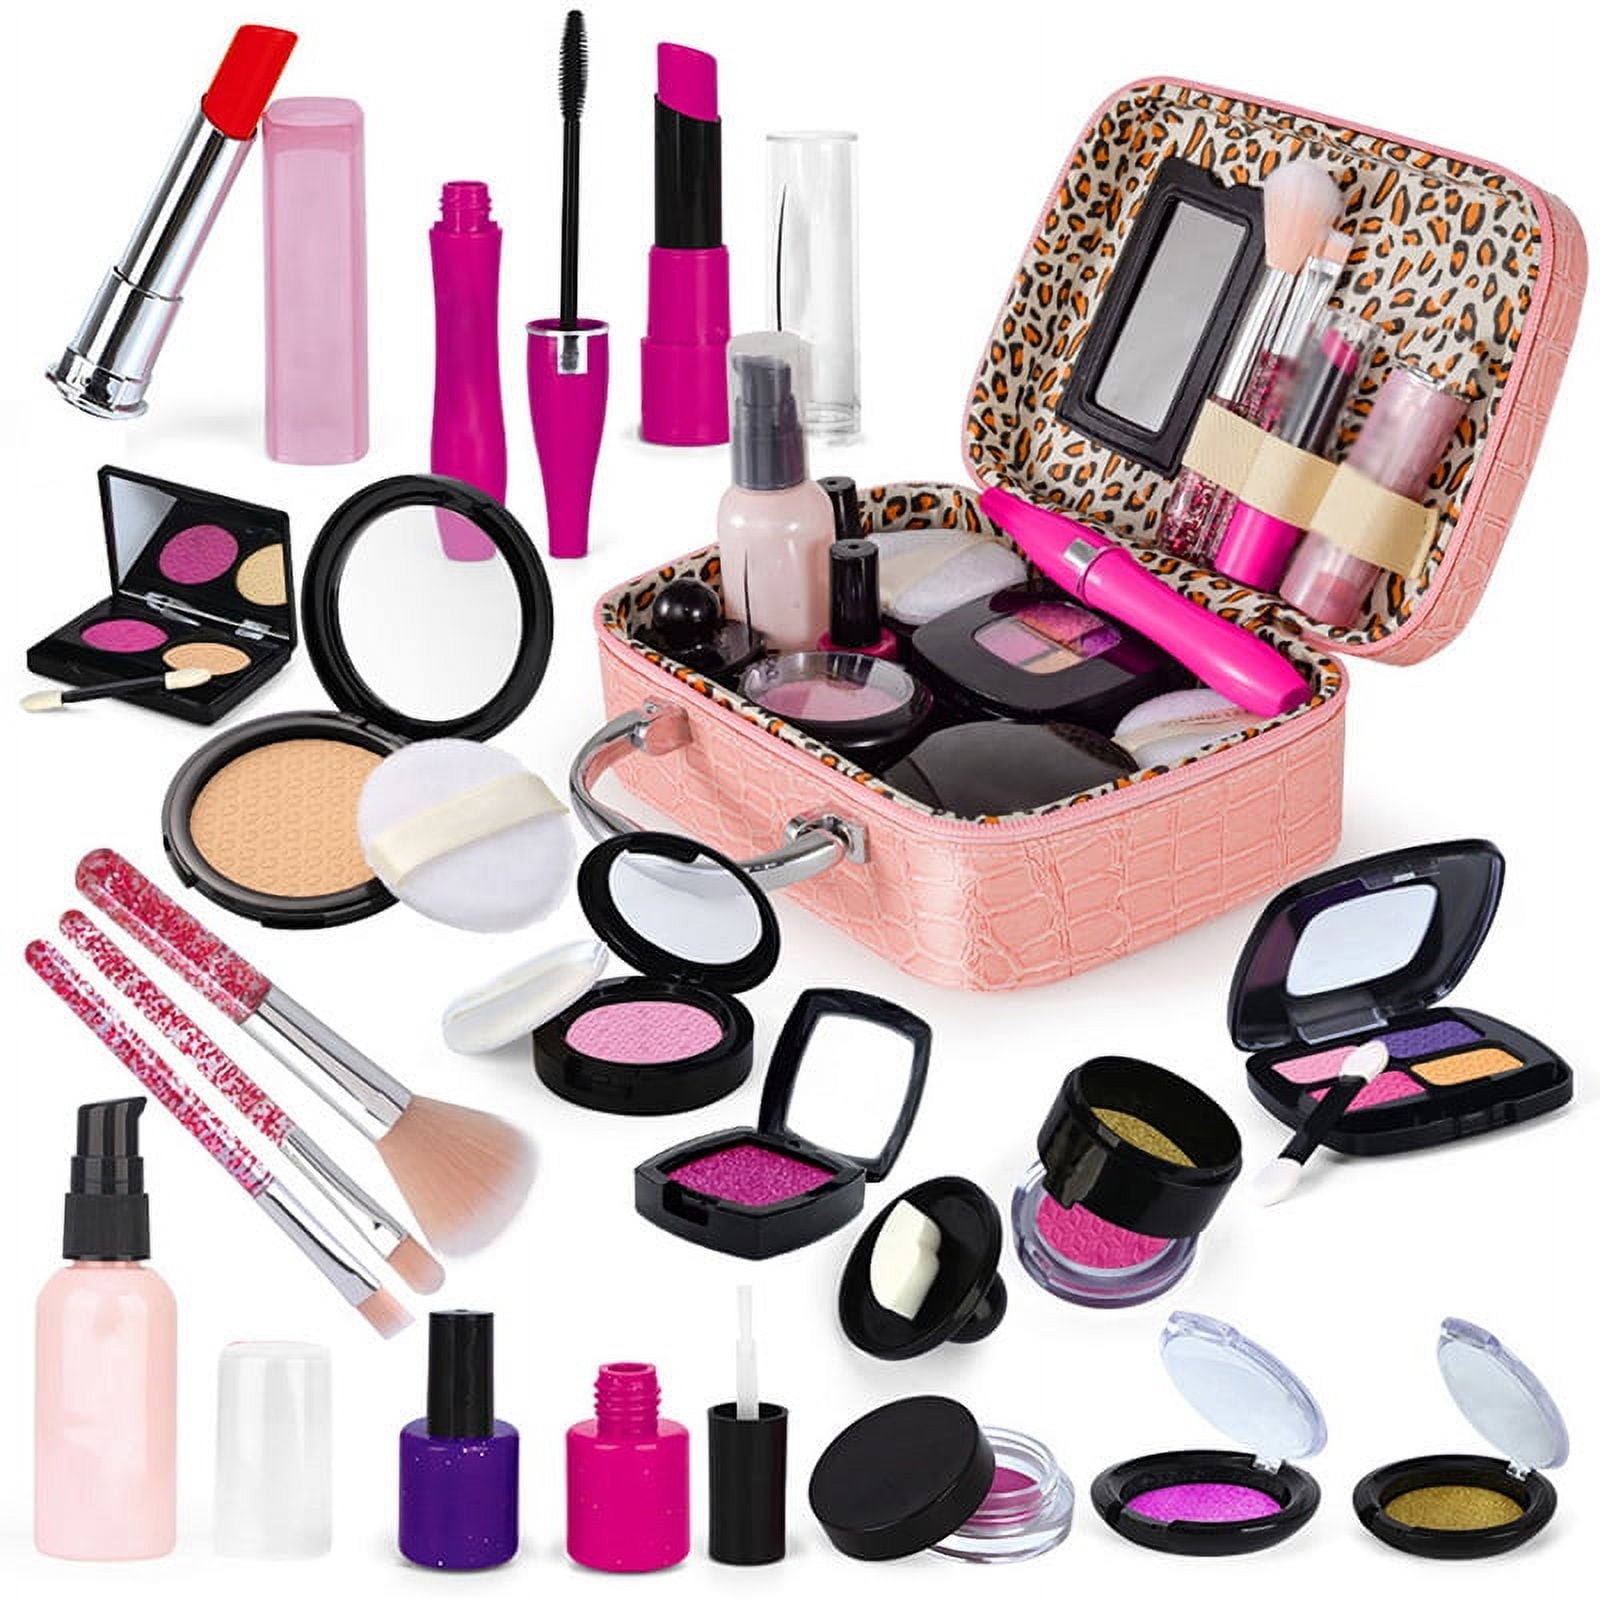 Make It Real: Glam Makeup Set - 10 Piece Travel Hard Case, Tweens & Girls, All-In-One Cosmetic & Beauty Kit, Includes Instrumental Dream Guide for